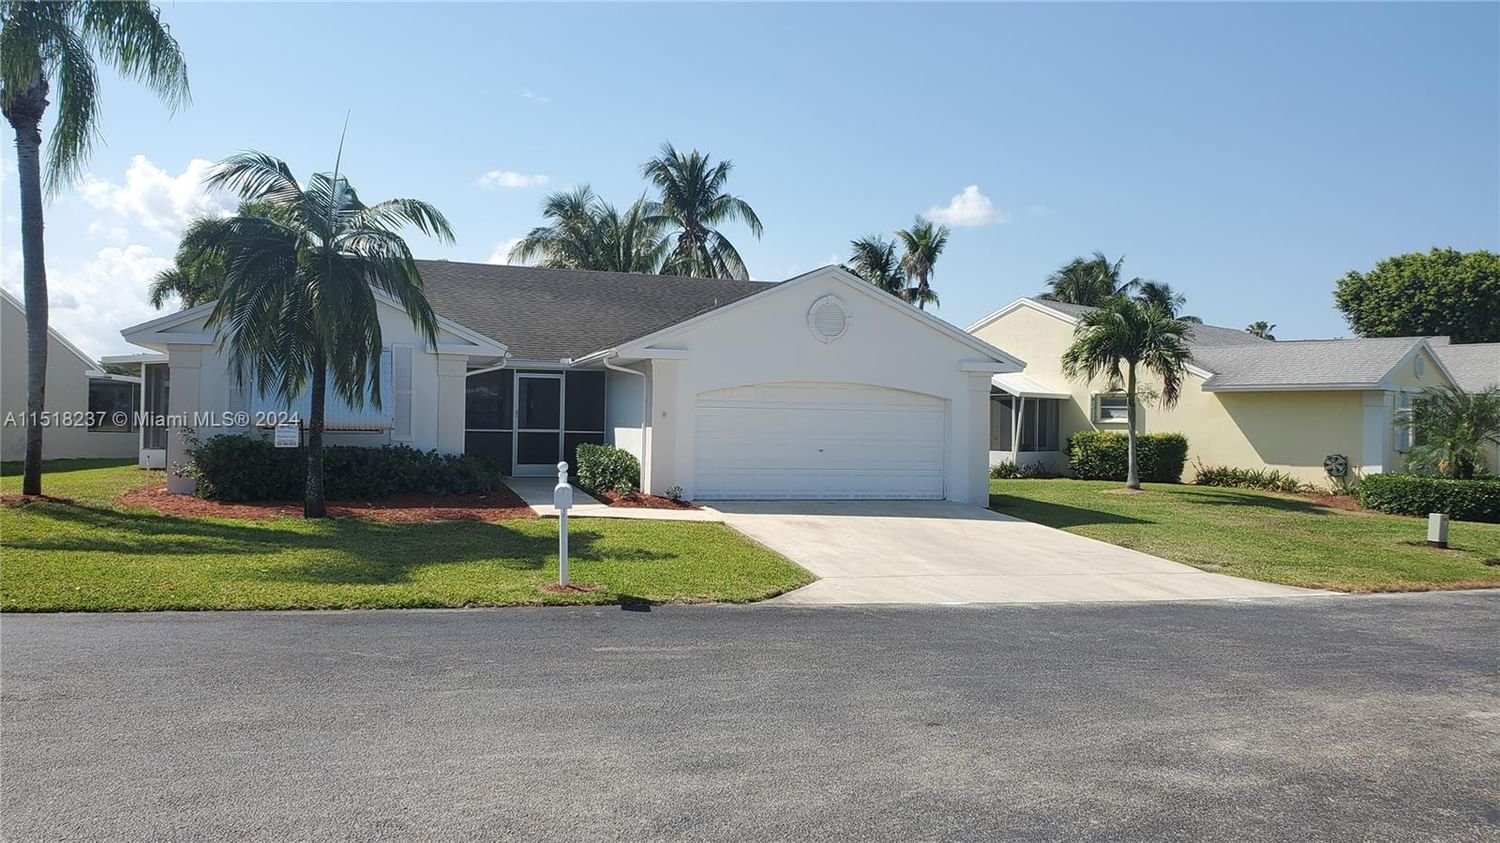 Real estate property located at 720 25th Ln, Miami-Dade County, KEYS-GATE NO 1, Homestead, FL